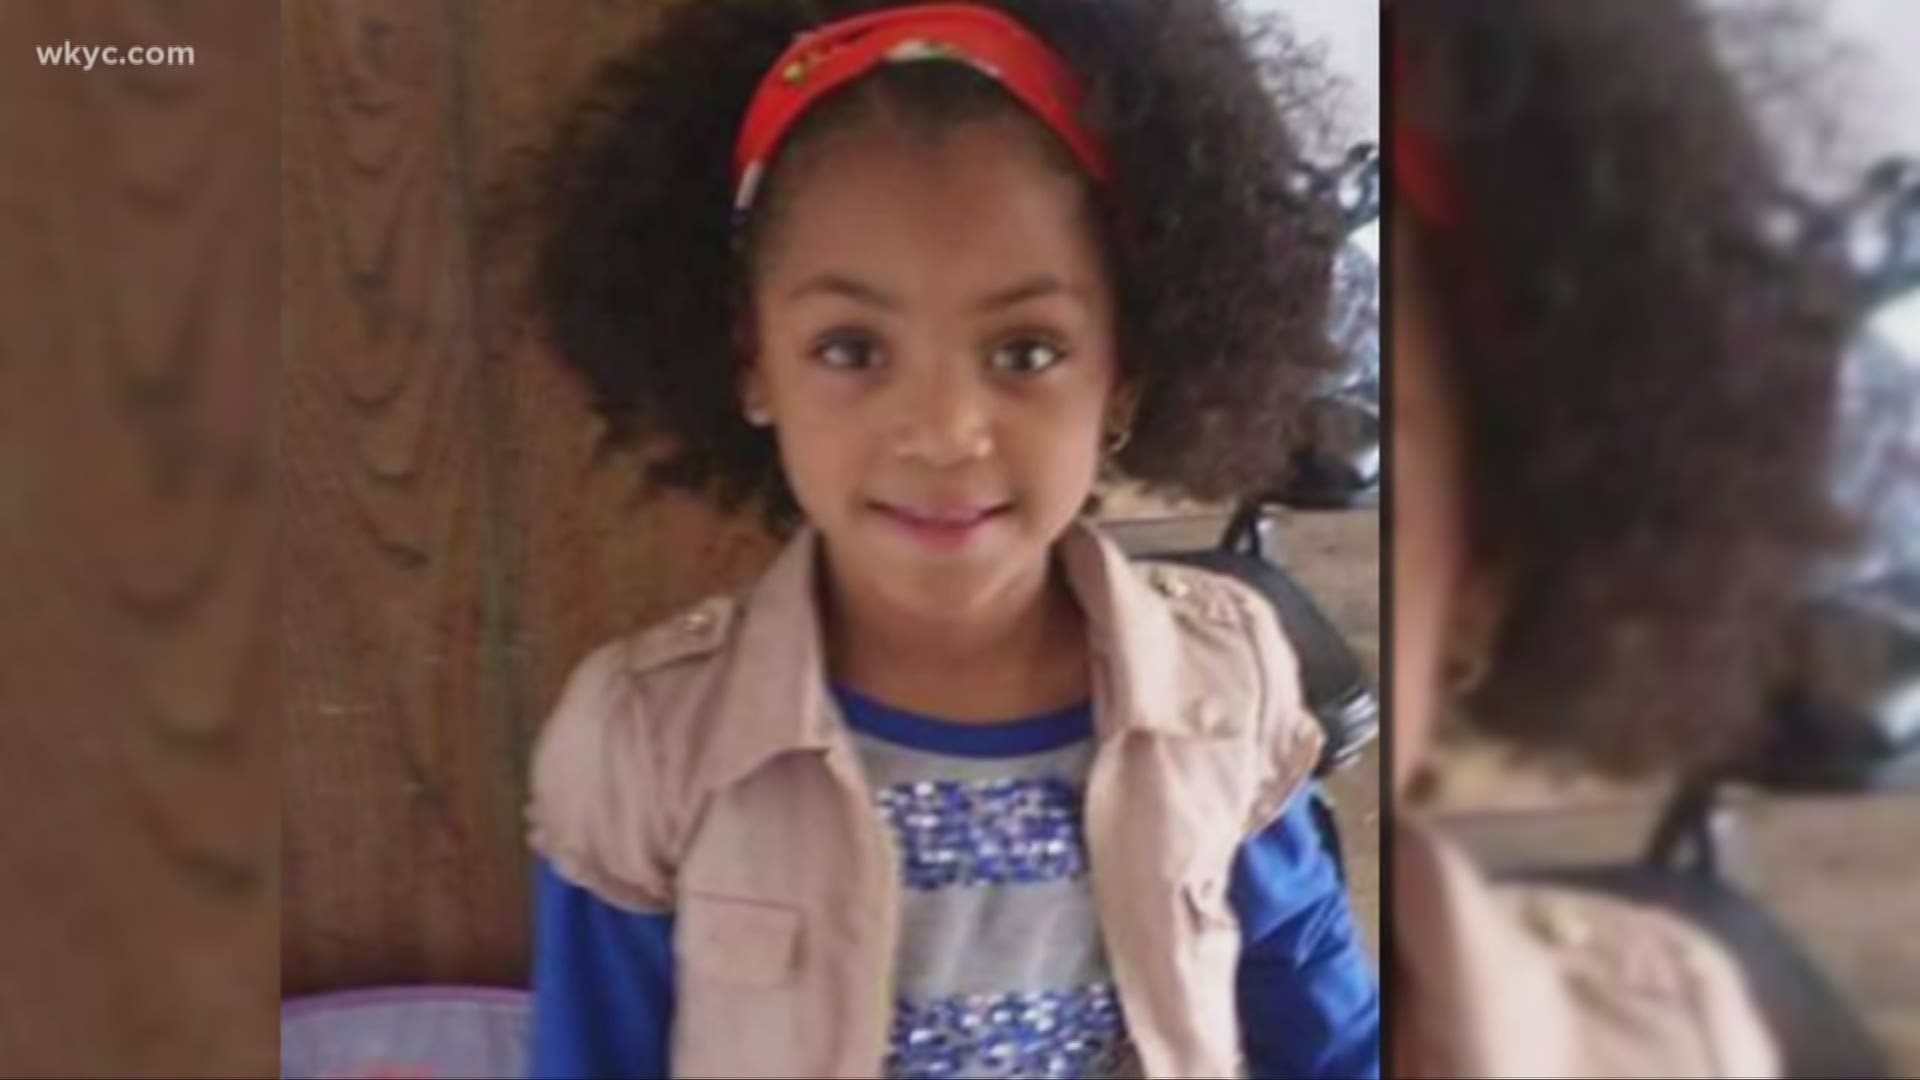 While family of 9-year-old Saniyah Nicholson prepares for funeral, 2 suspects now in custody